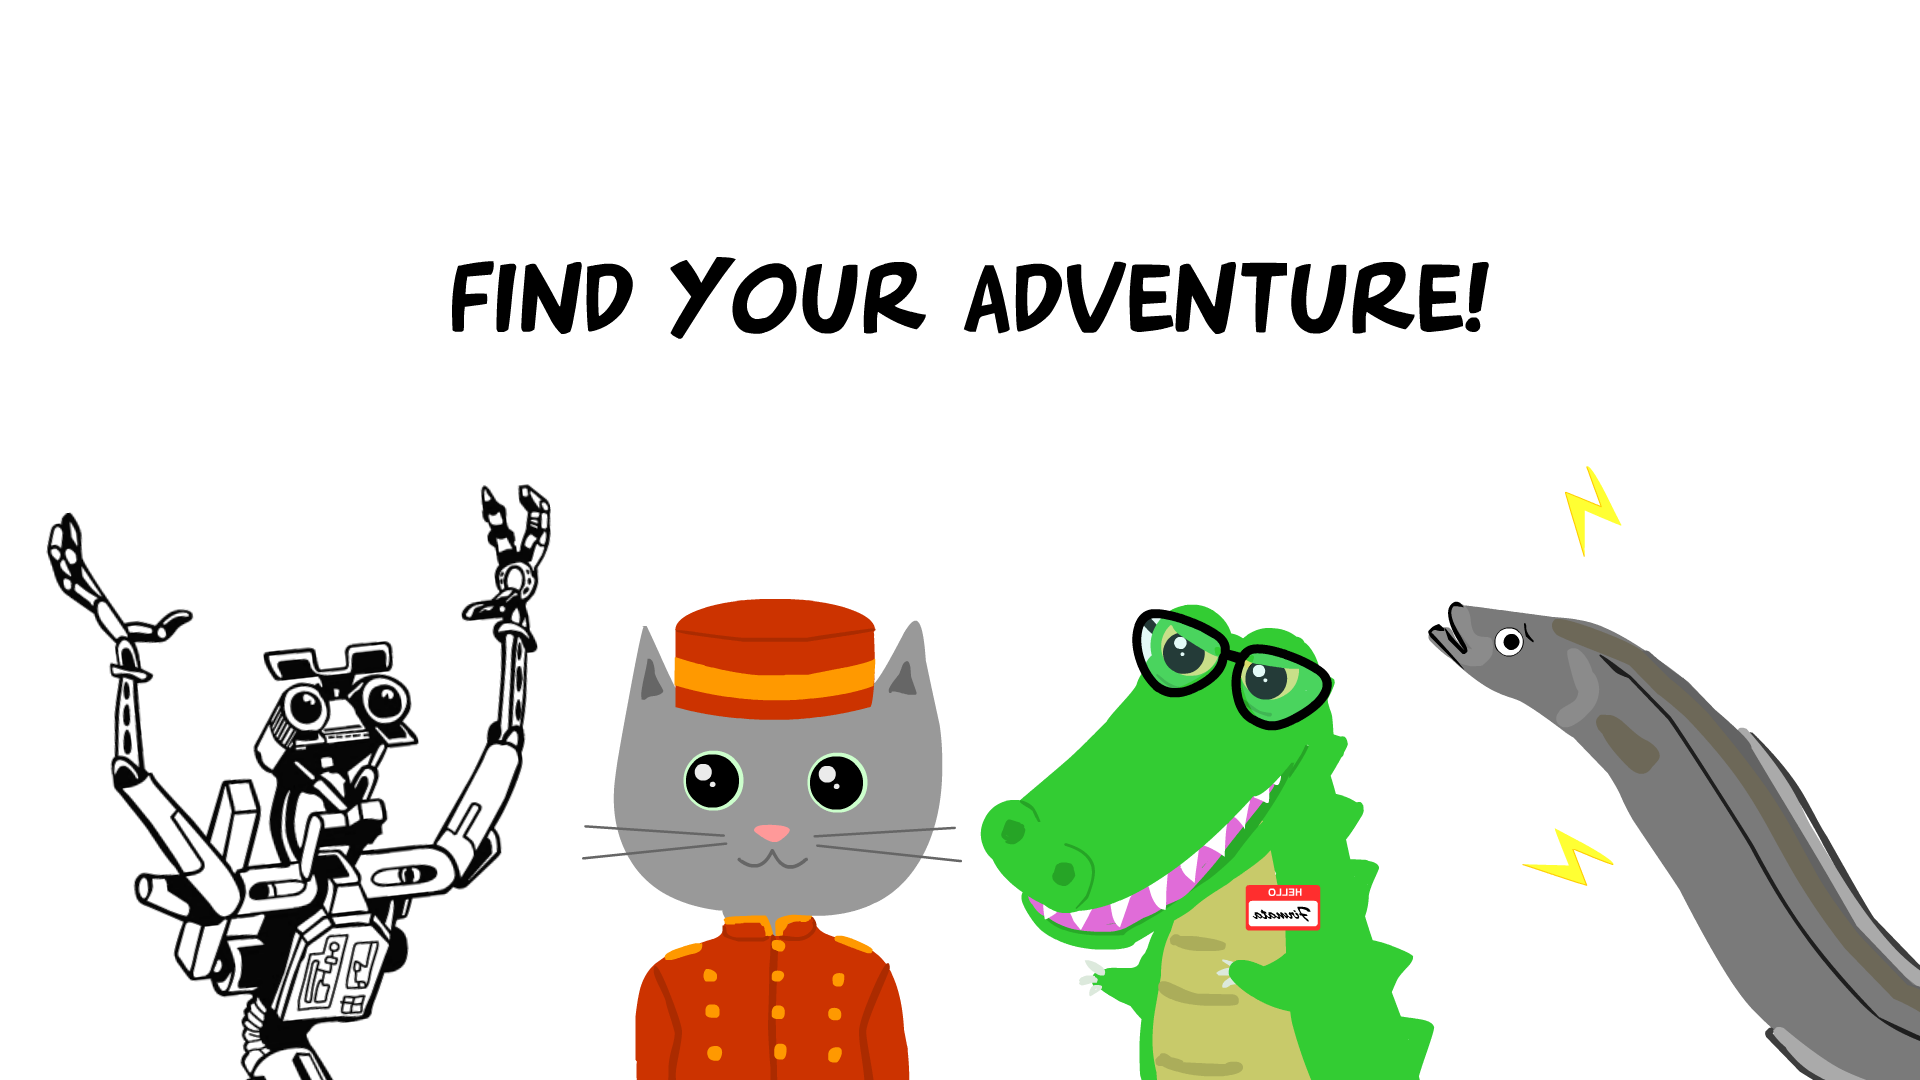 illustration of johnny-five the robot, a bellboy cat, nerdy crocodile with glasses, and an eletric eel looking a llittle concerned.